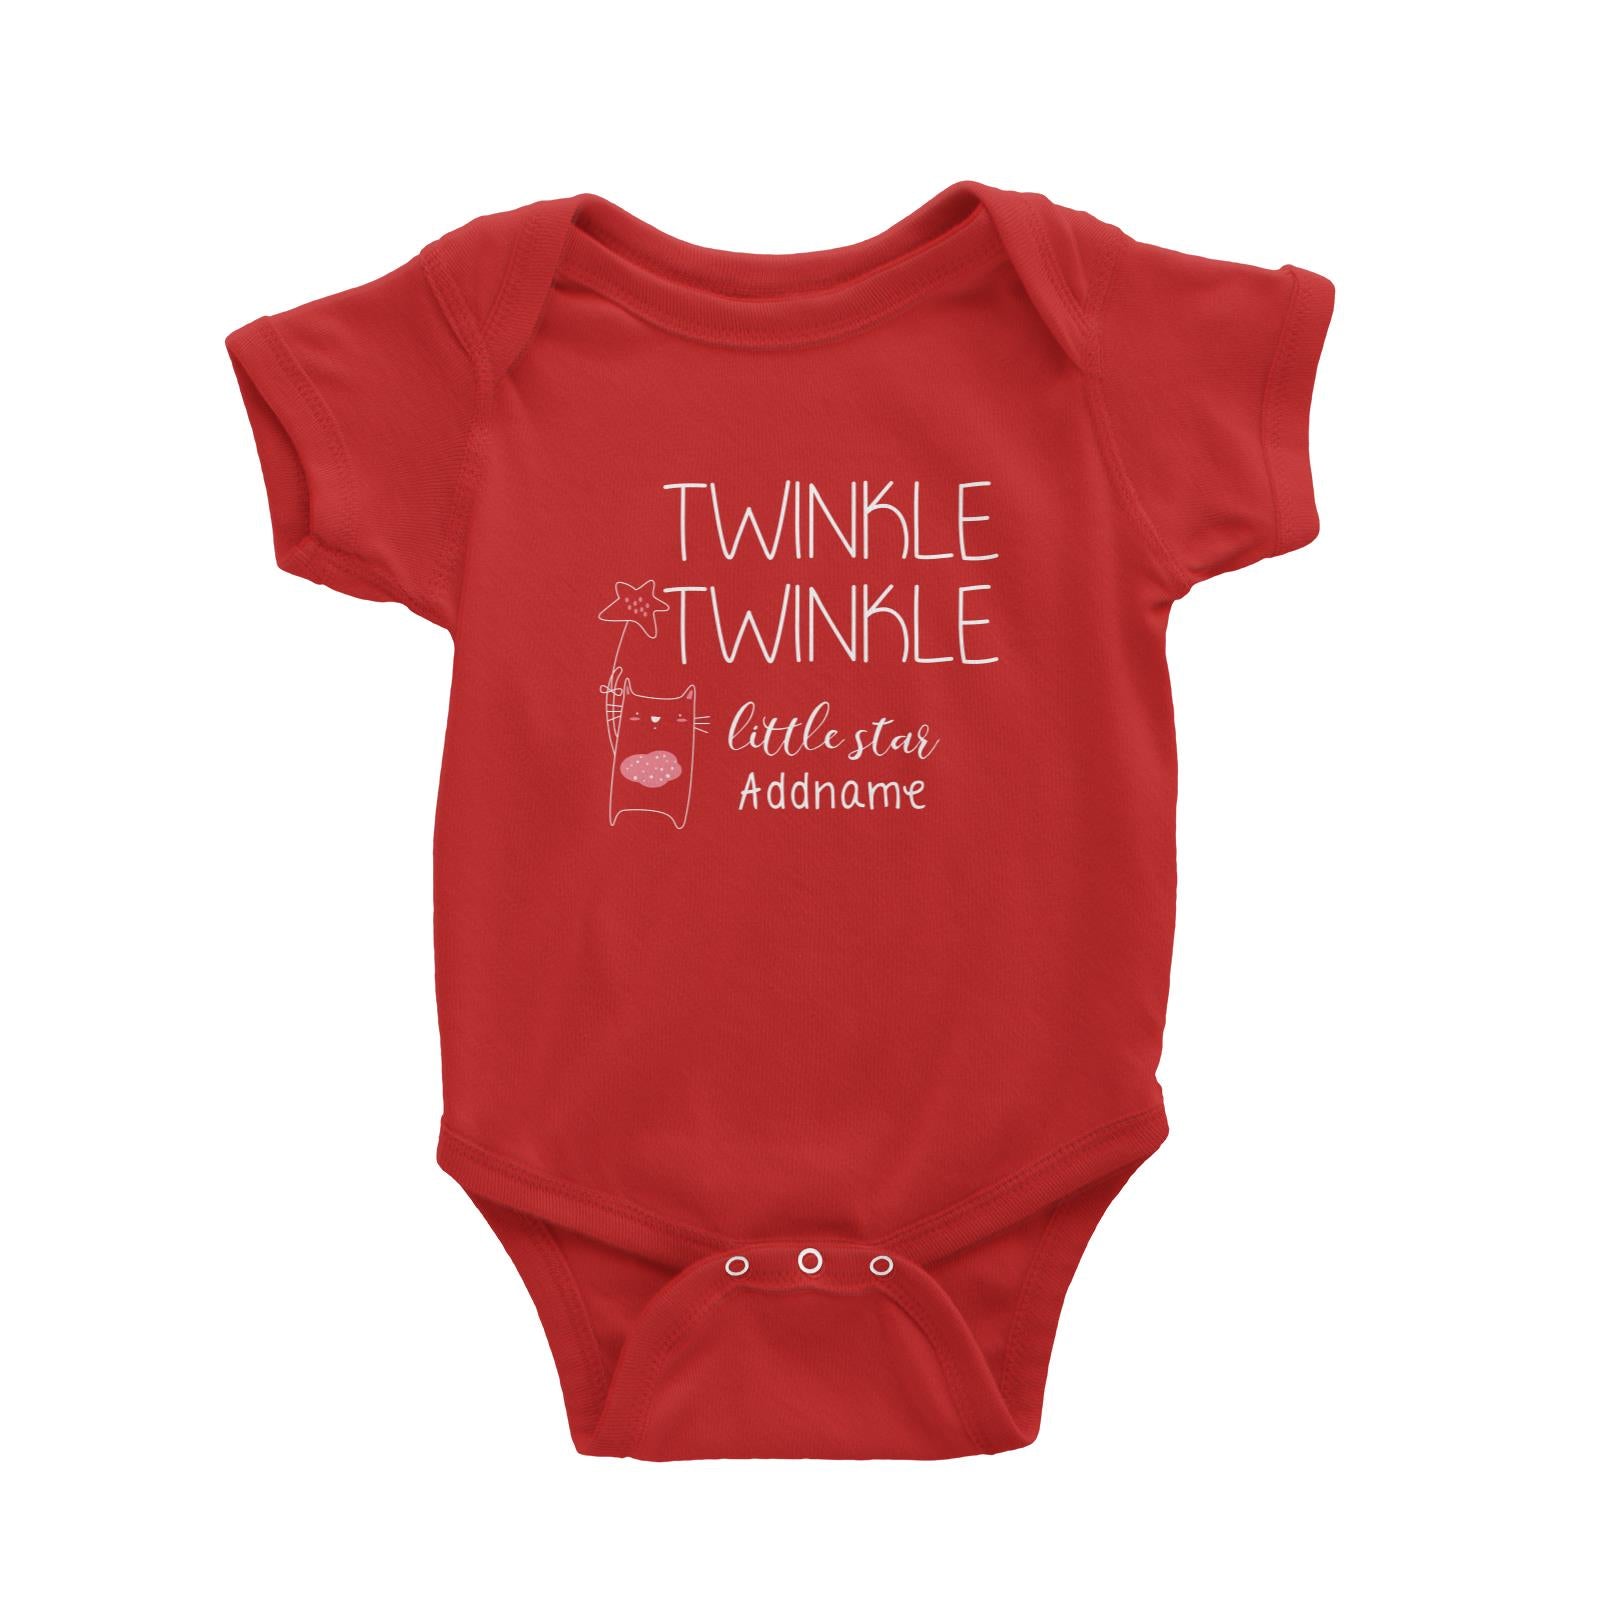 Cute Animals and Friends Series 2 Cat Twinkle Twinkle Little Star Addname Baby Romper